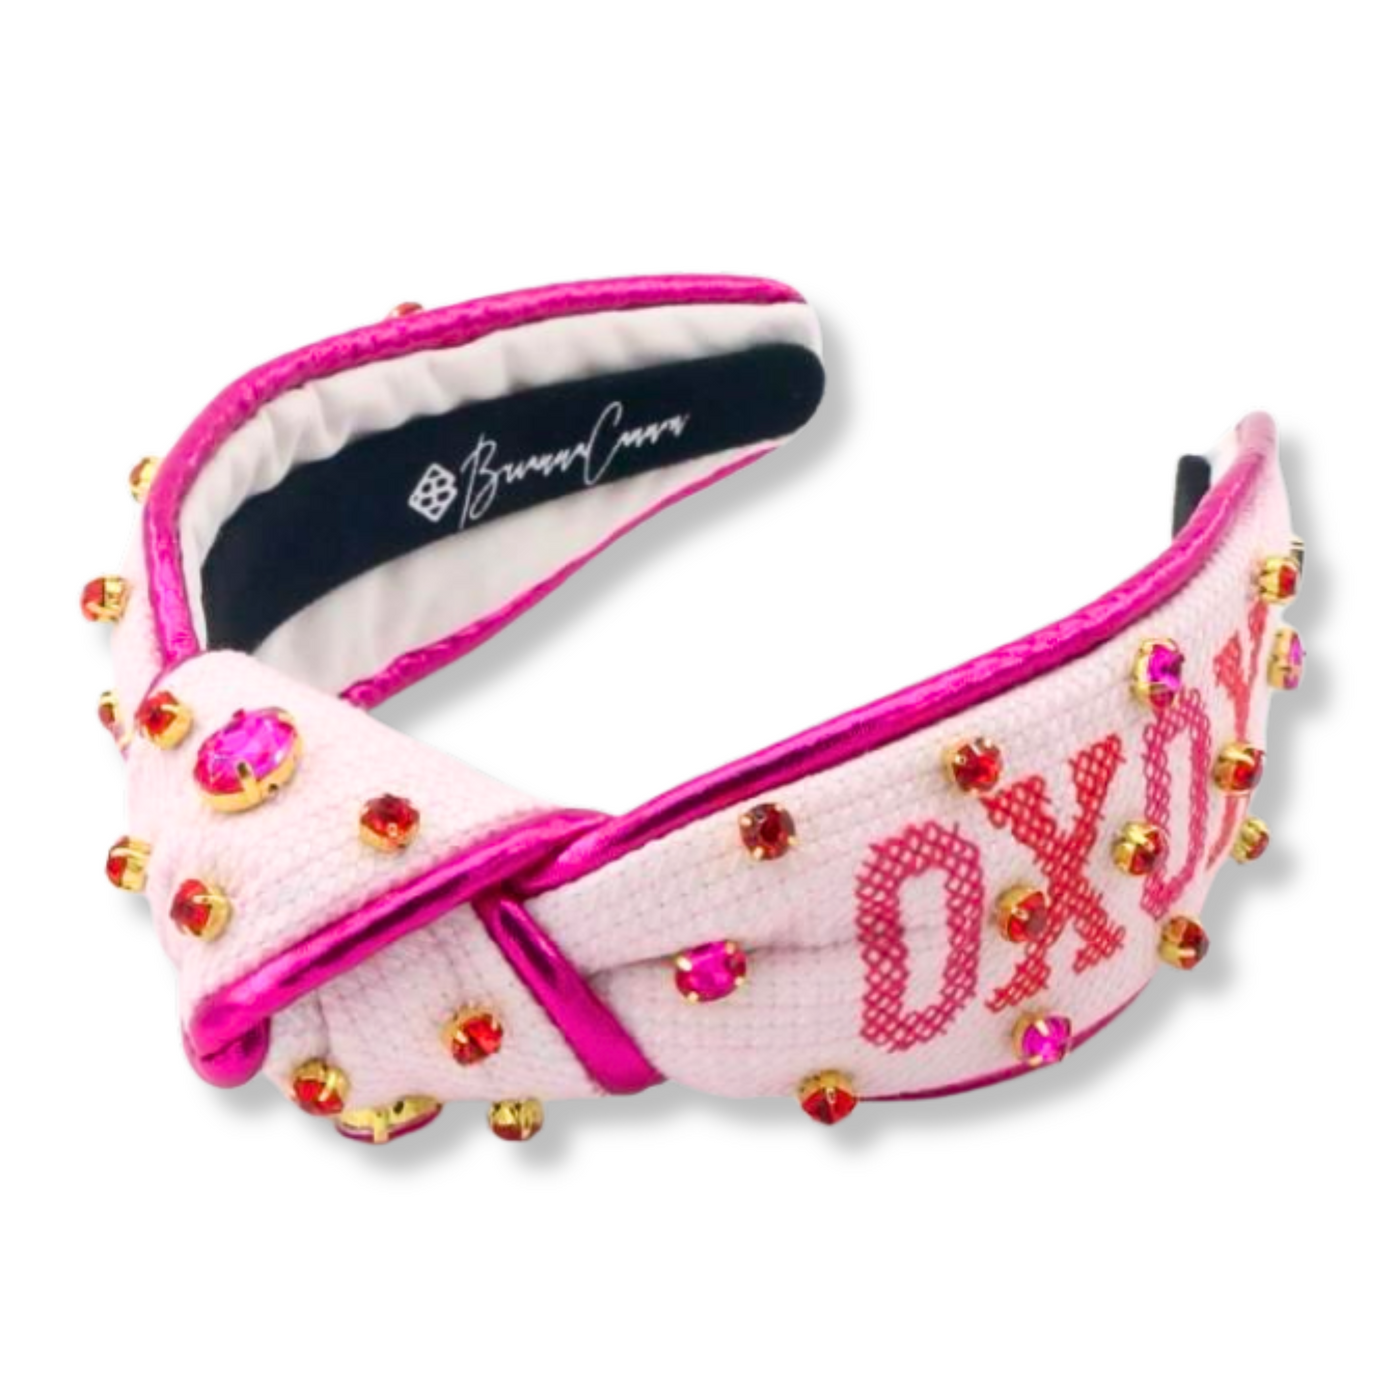 Adult Size XOXO Cross Stitch Headband with Red Crystals